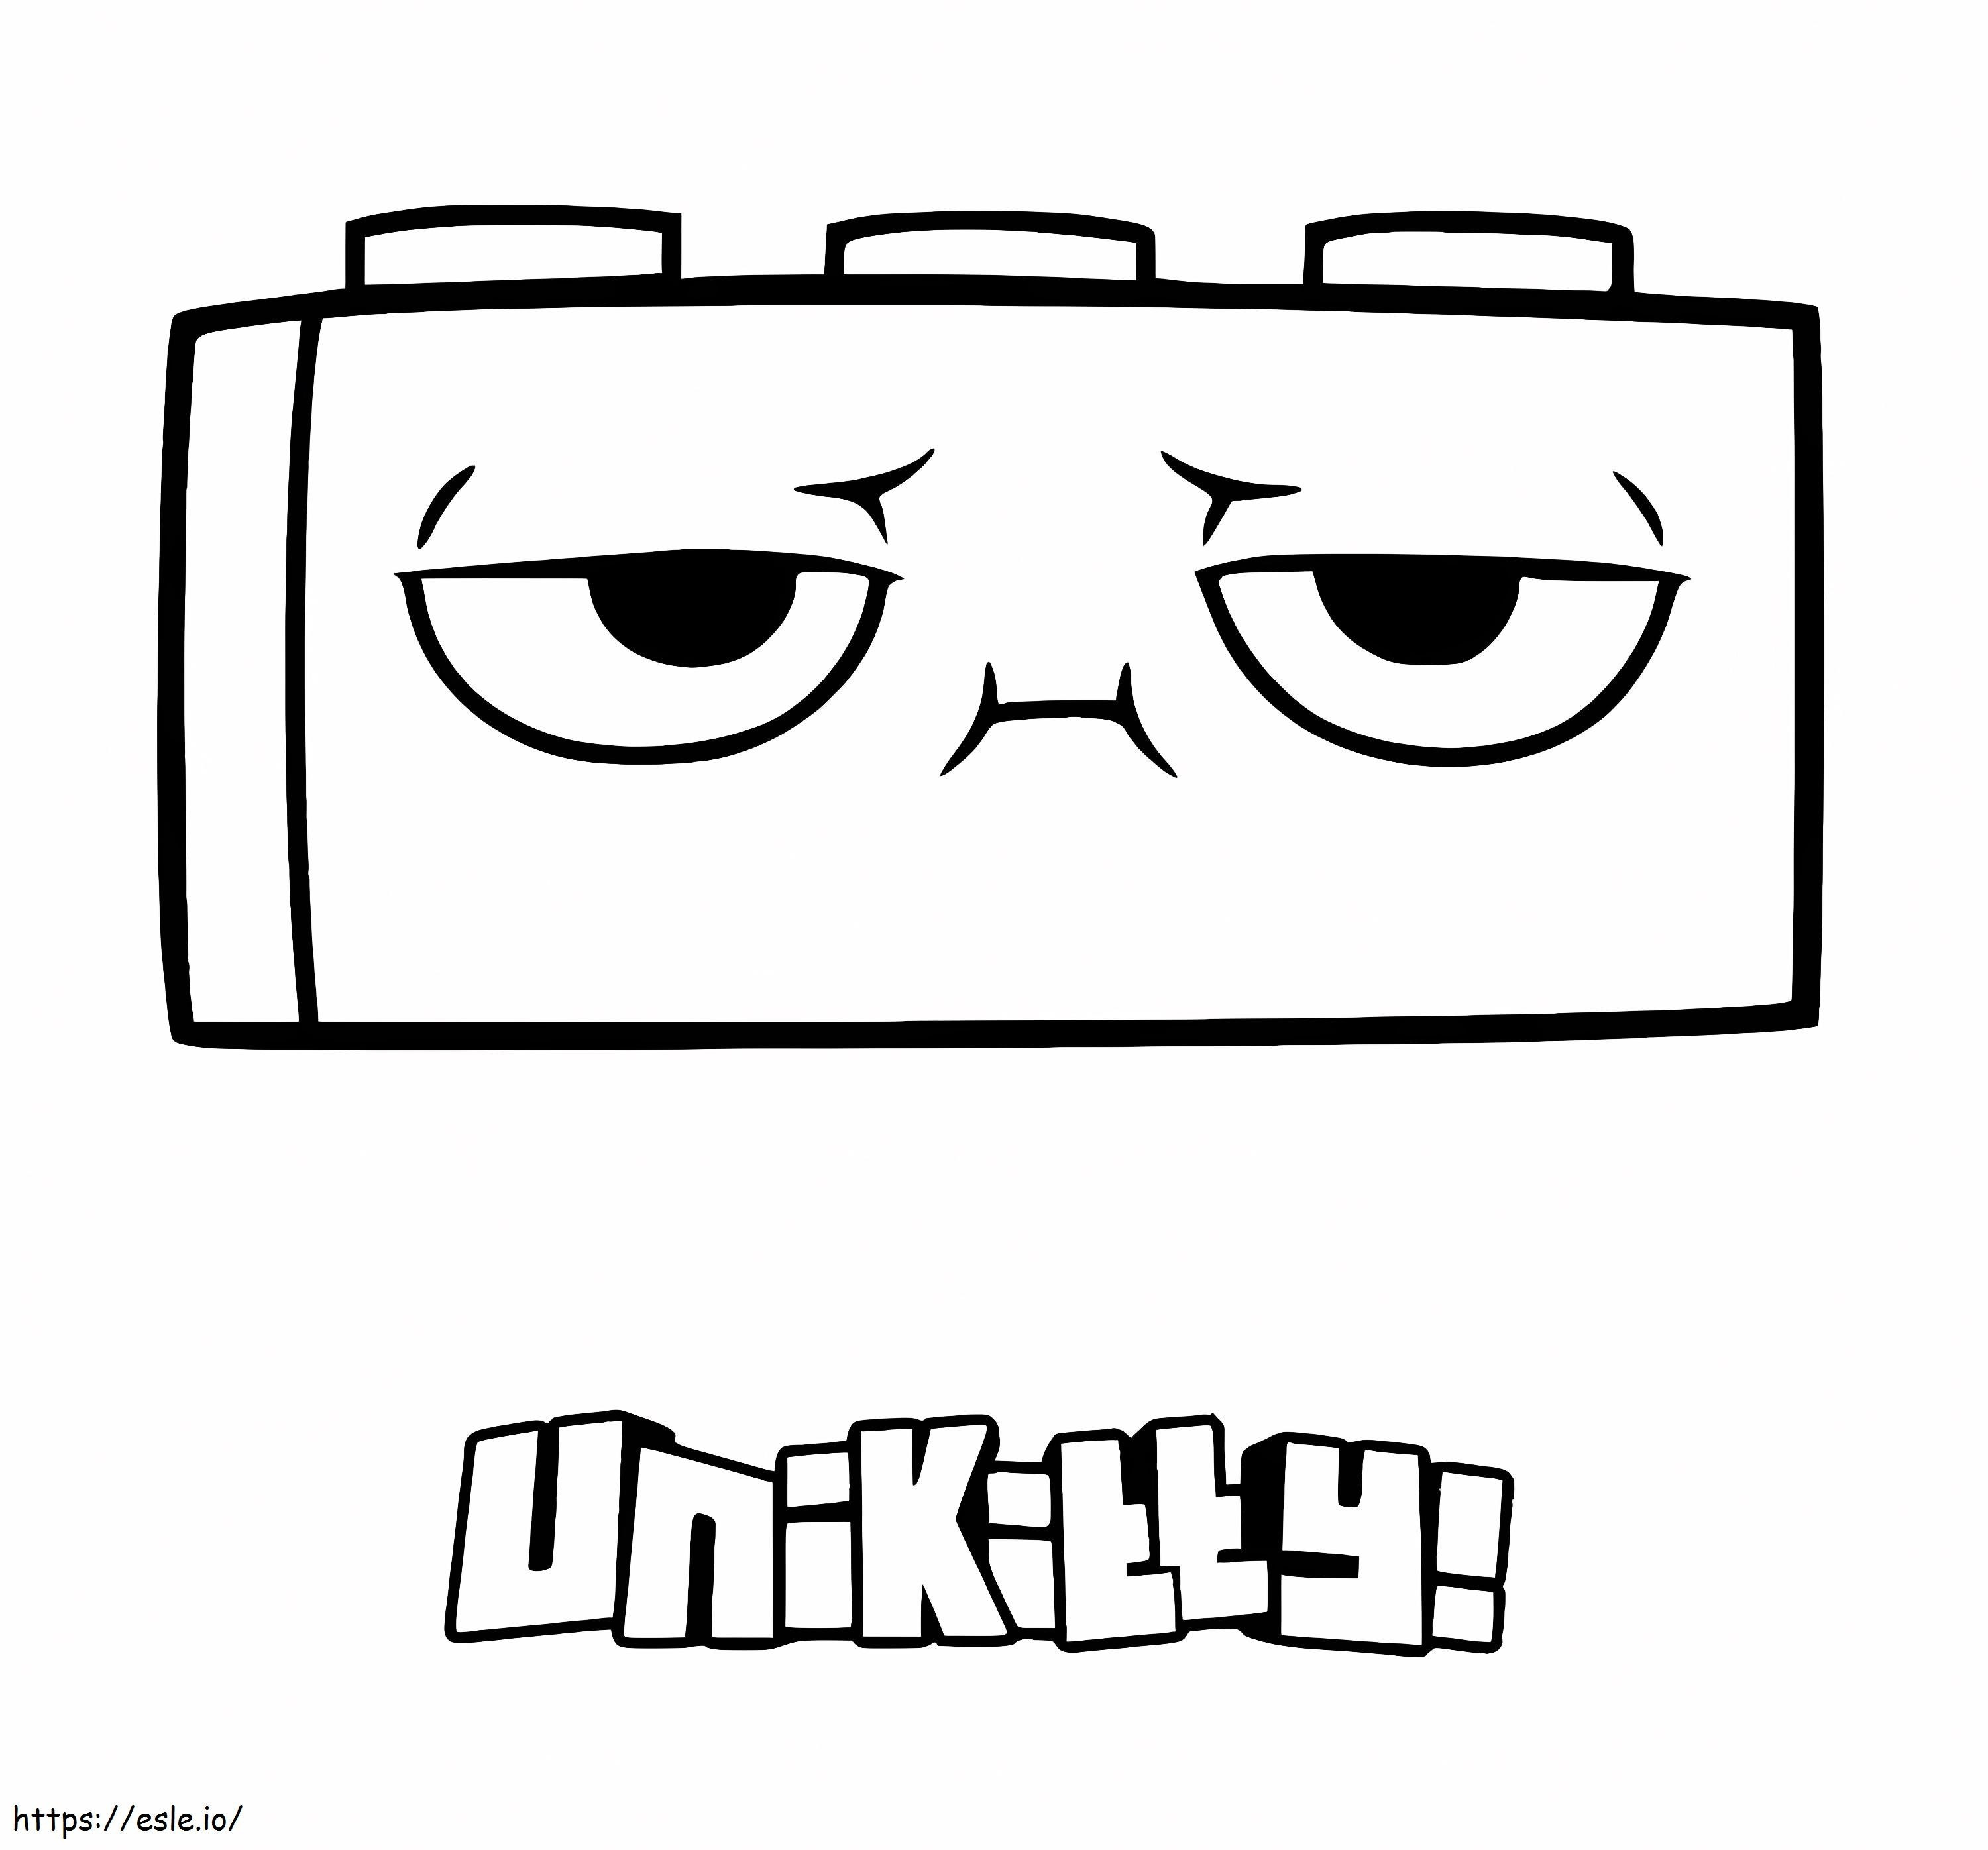 Richard From Unikitty coloring page